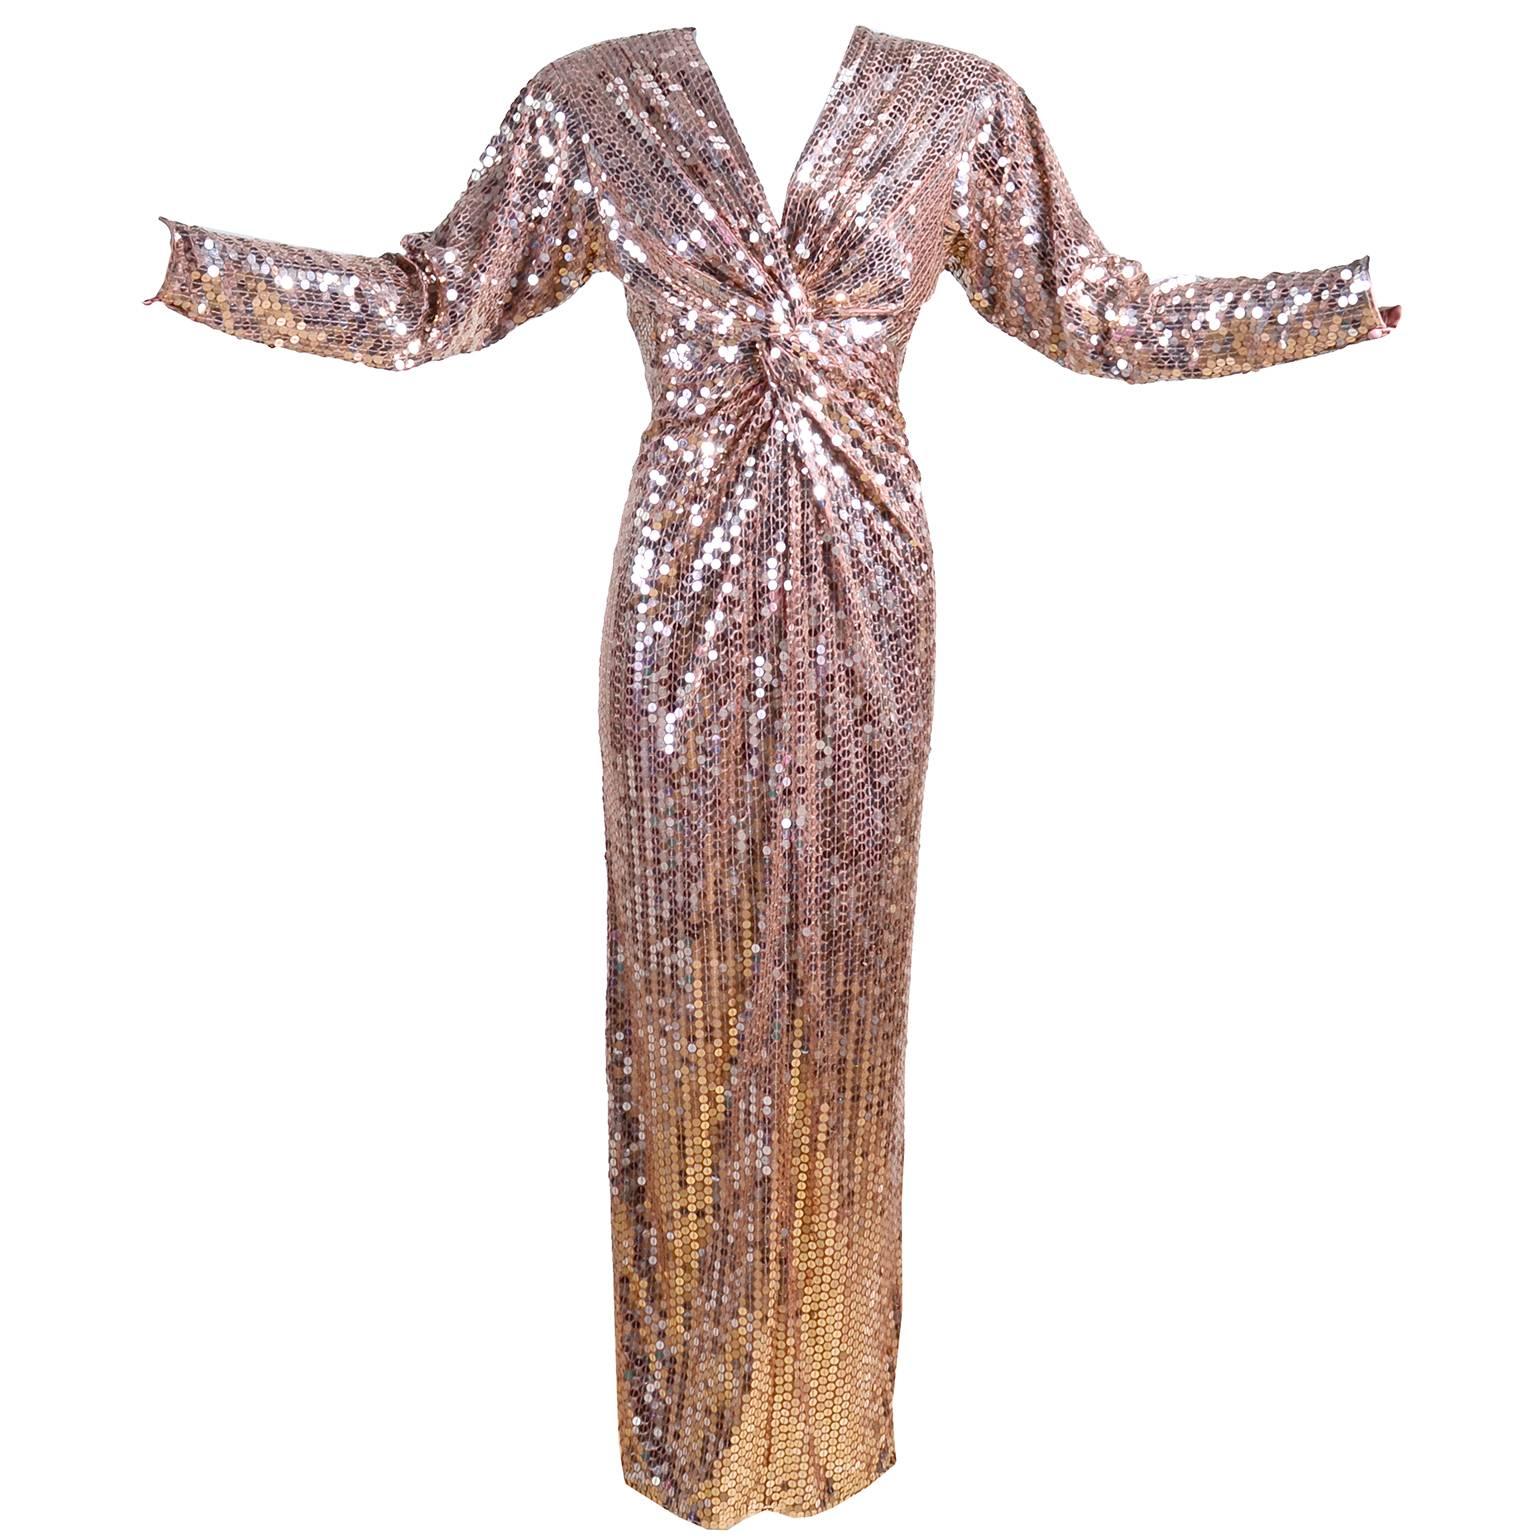 This is an incredible early 1980's  slinky vintage Oleg Cassini evening gown covered in rose gold sequins! This sparkling long dress twists in the front at the bottom of the V neckline. It has slight shoulder pads, as well as a slit up the back. We